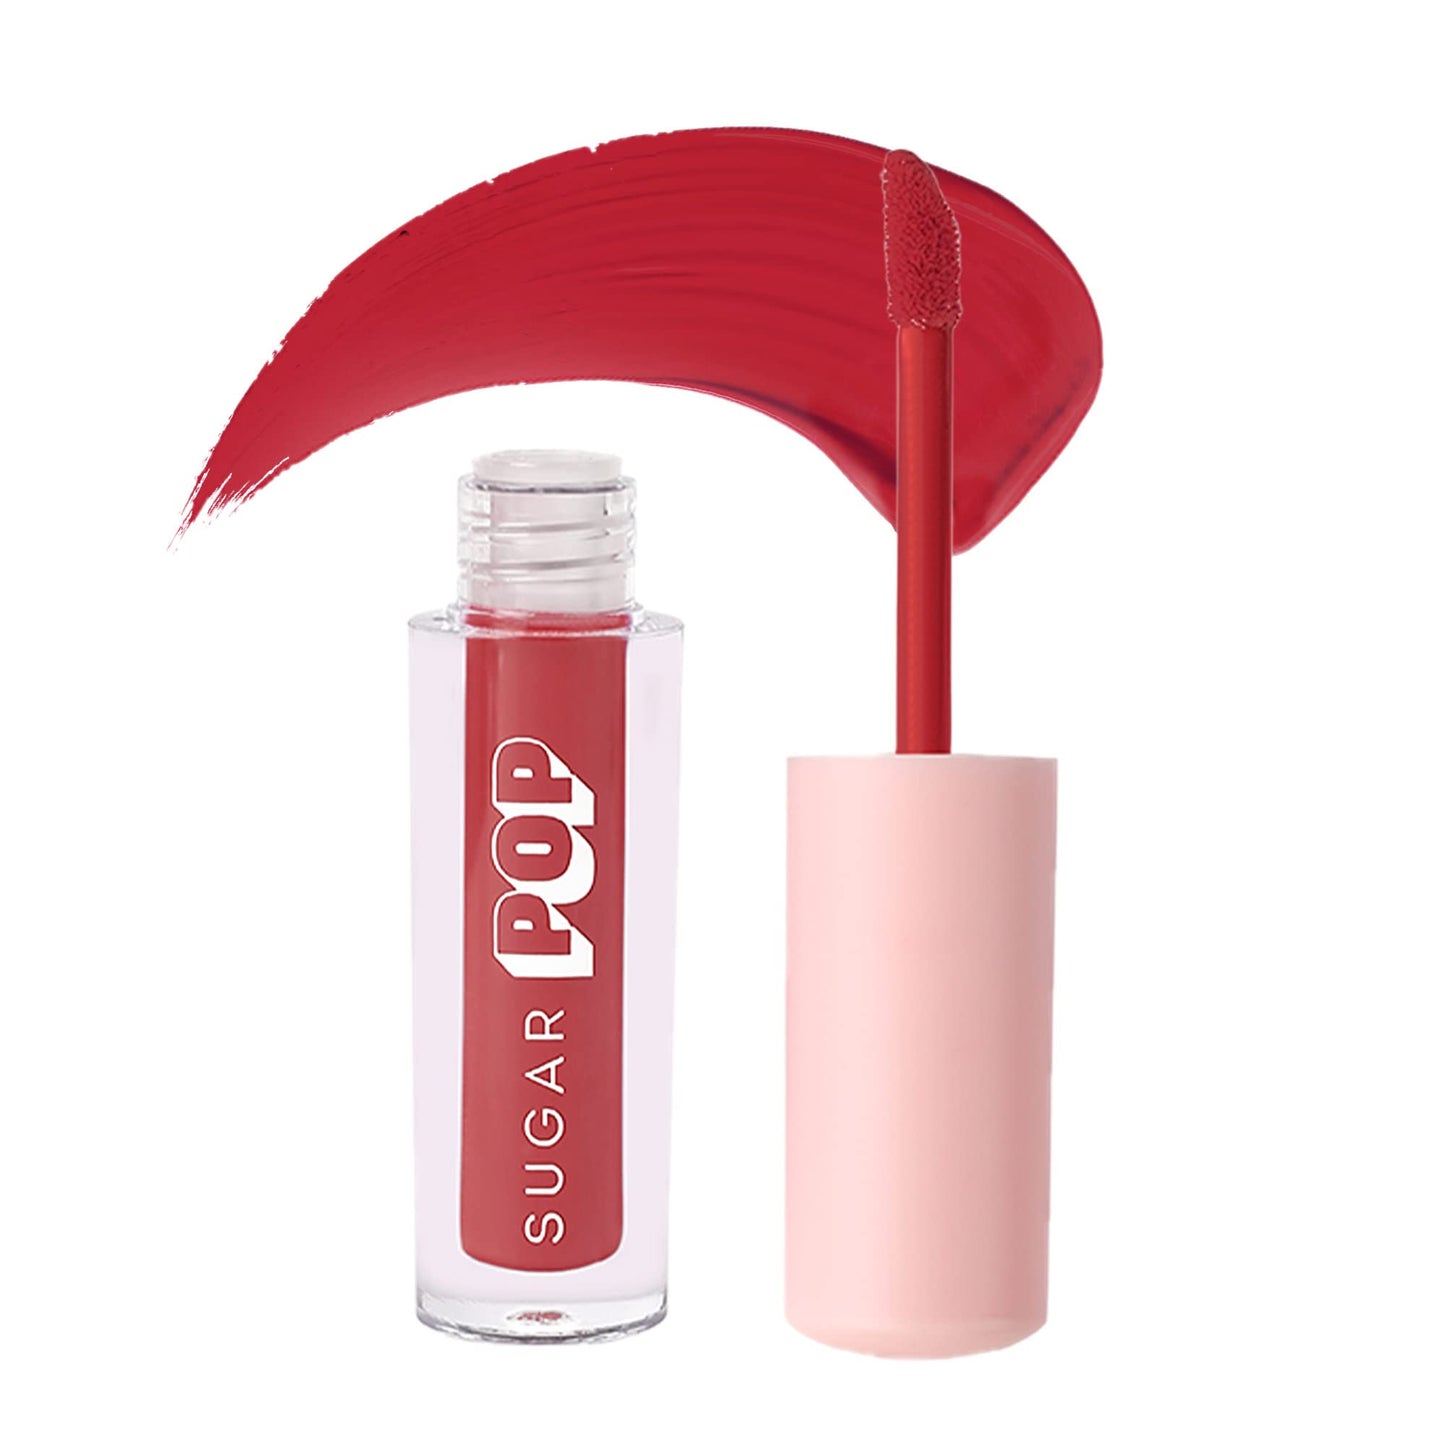 SUGAR POP Matte Lipcolour - 07 Wine (Berry Red) – 1.6 ml - Lasts Up to 8 hours l Red Lipstick & SUGAR POP Matte Lipcolour - 14 Brick (Red with hints of orange) – 1.6 ml l Non-Drying, Smudge Proof